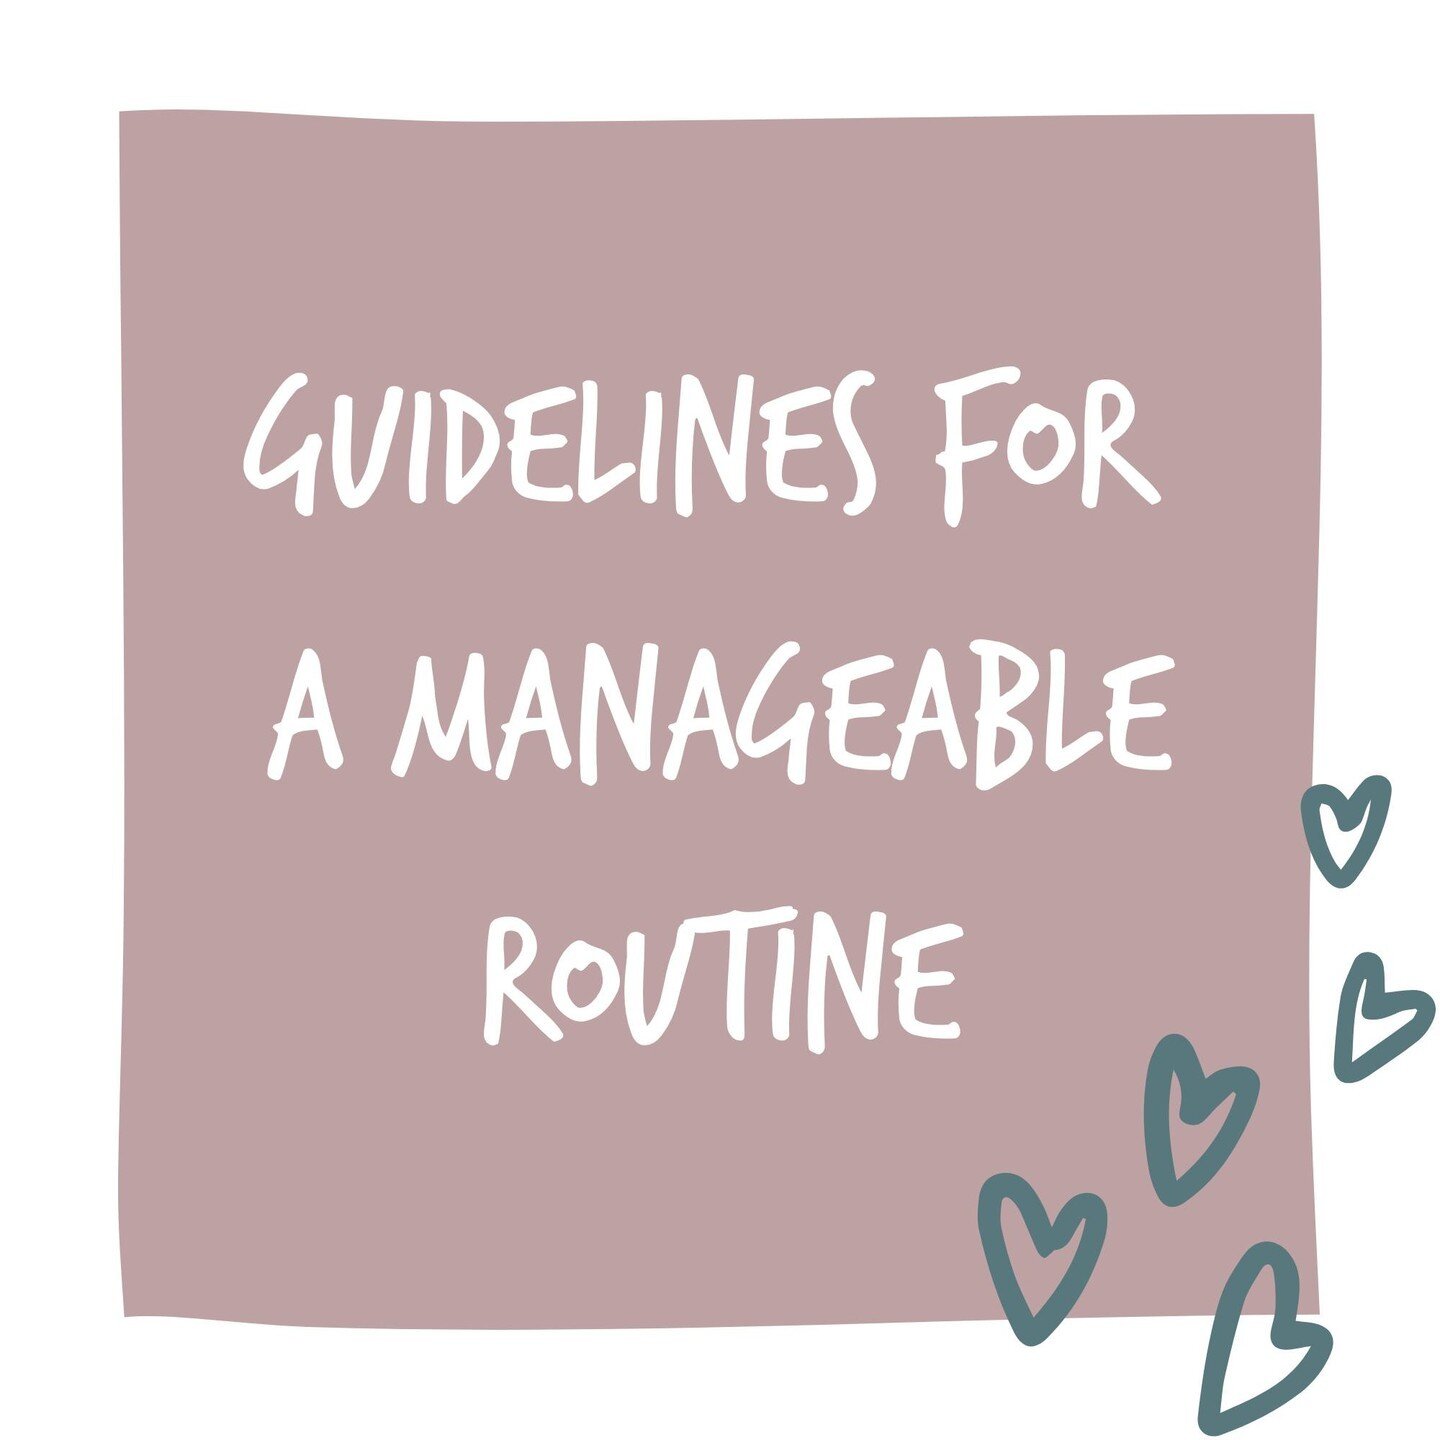 By structuring your baby's environment around her needs, you can create the perfect background for a routine that is structured, but that retains some flexibility. ⁠
⁠
❤️&zwj; Set yourself attainable goals⁠
❤️&zwj; Accept that you will have 'bad days